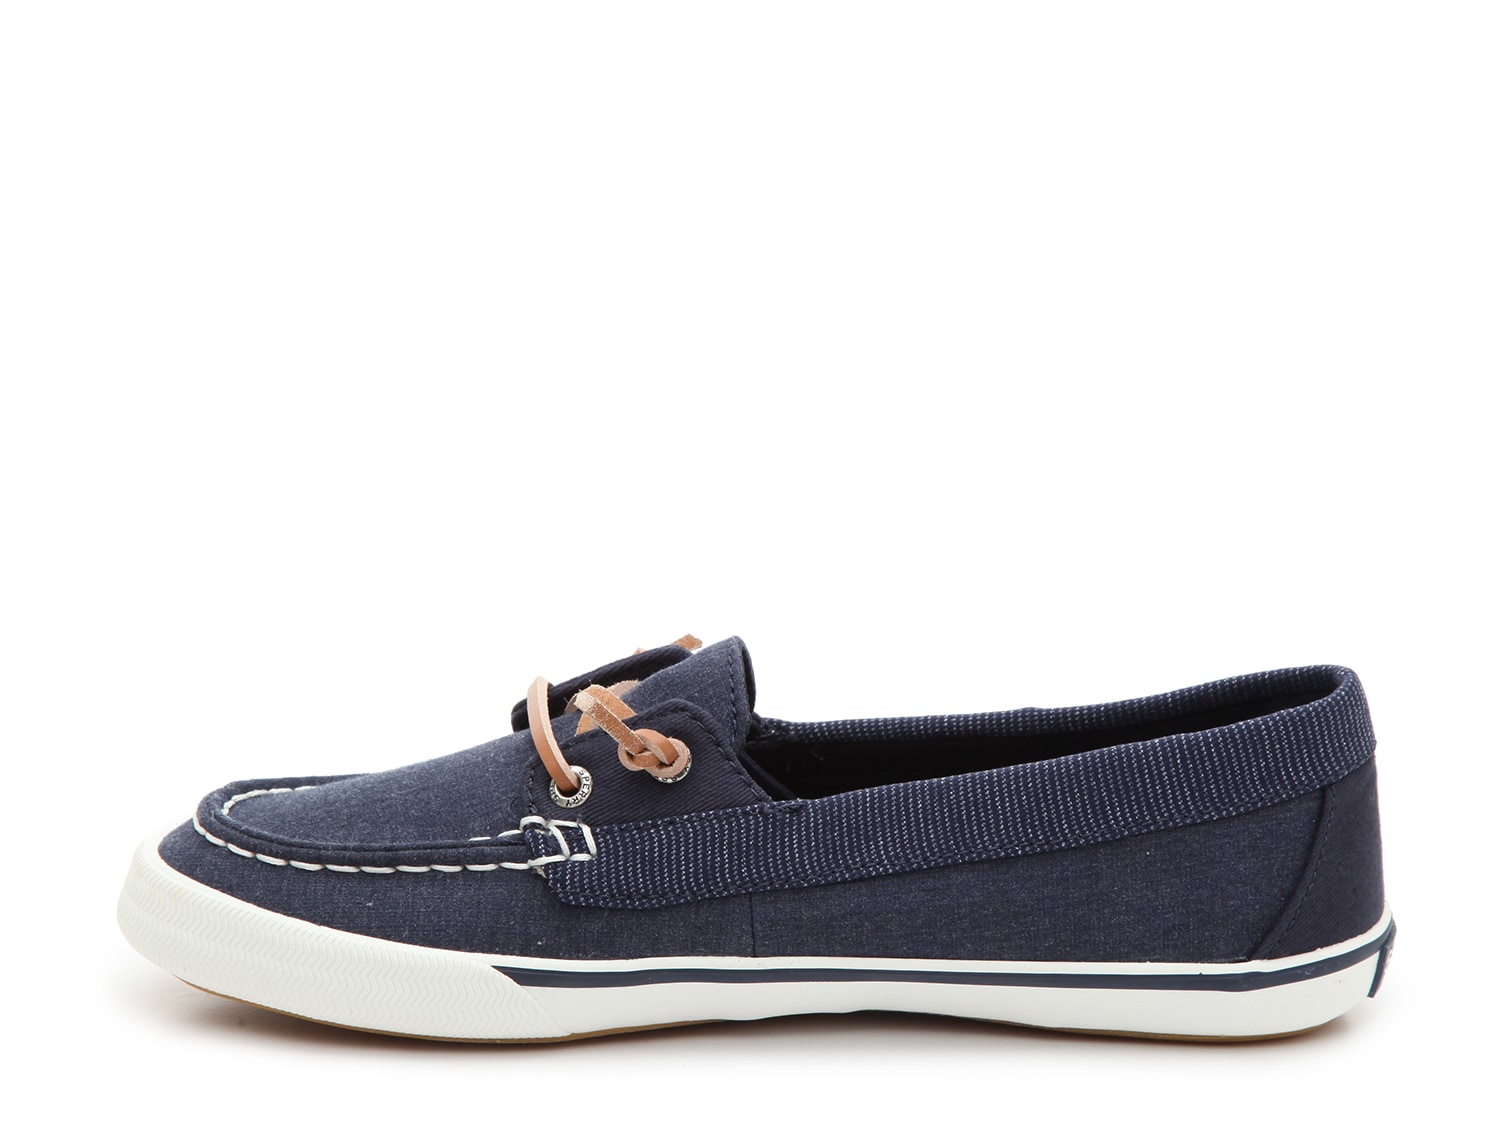 sperry lounge away navy